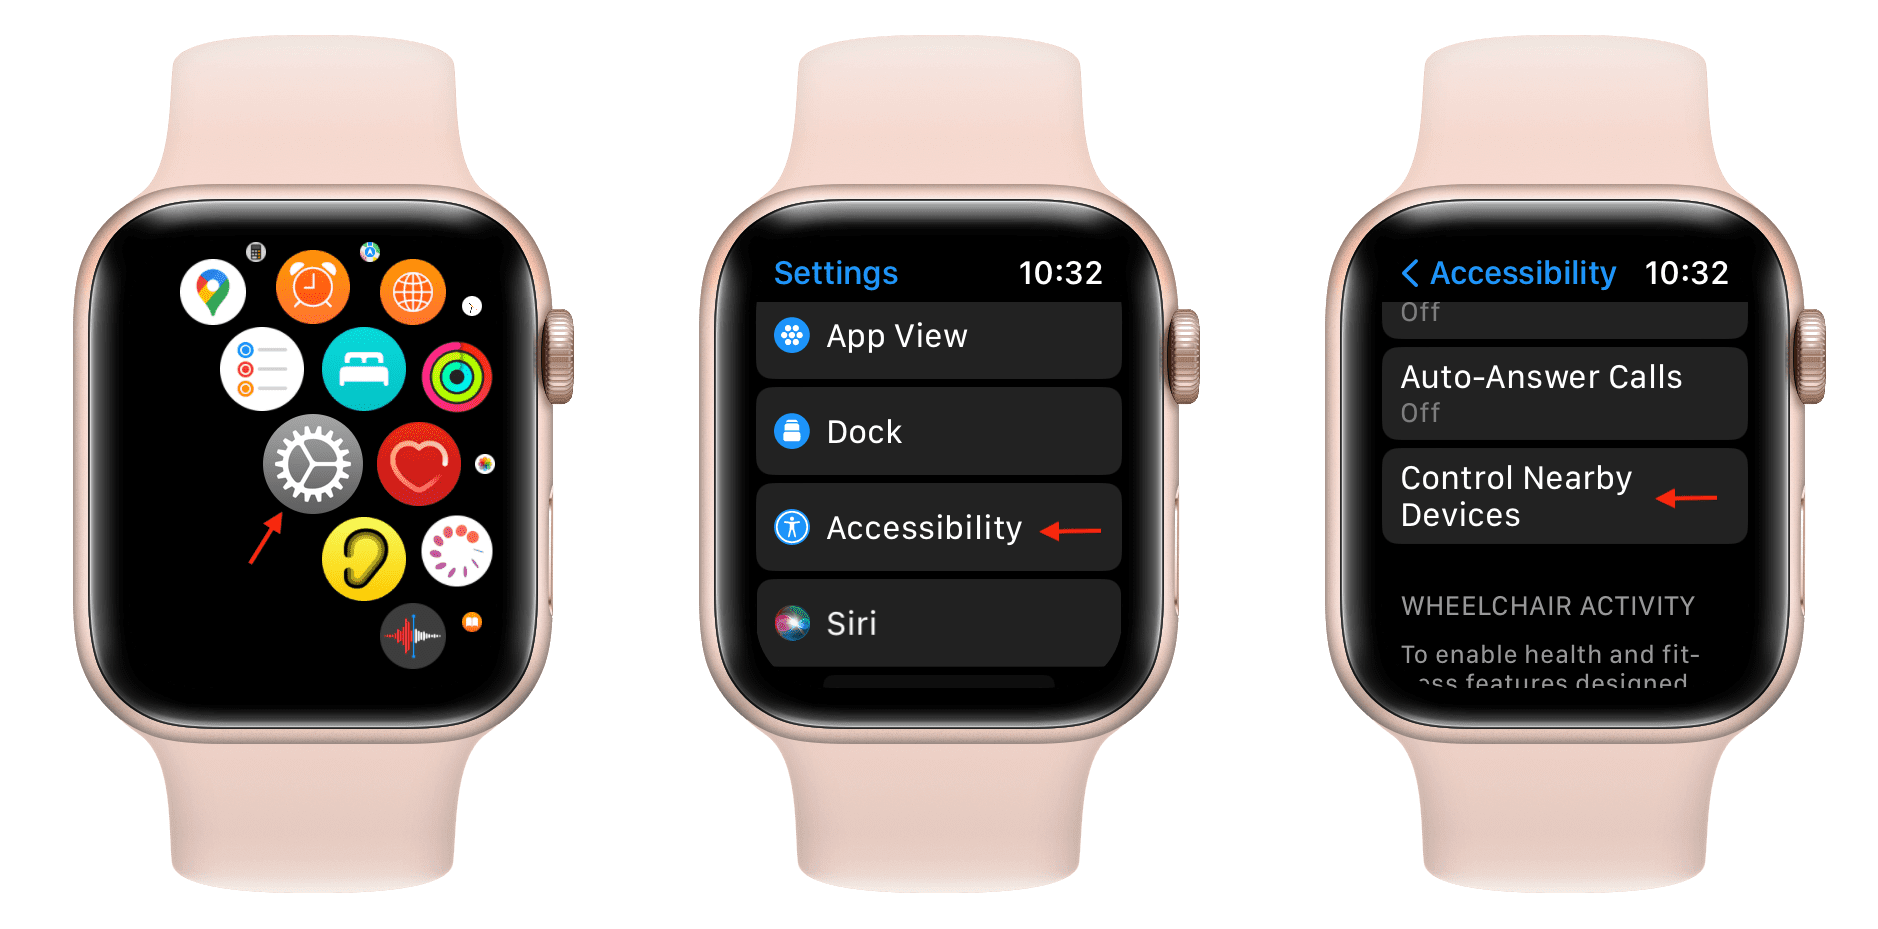 Control Nearby Devices in Apple Watch Accessibility settings